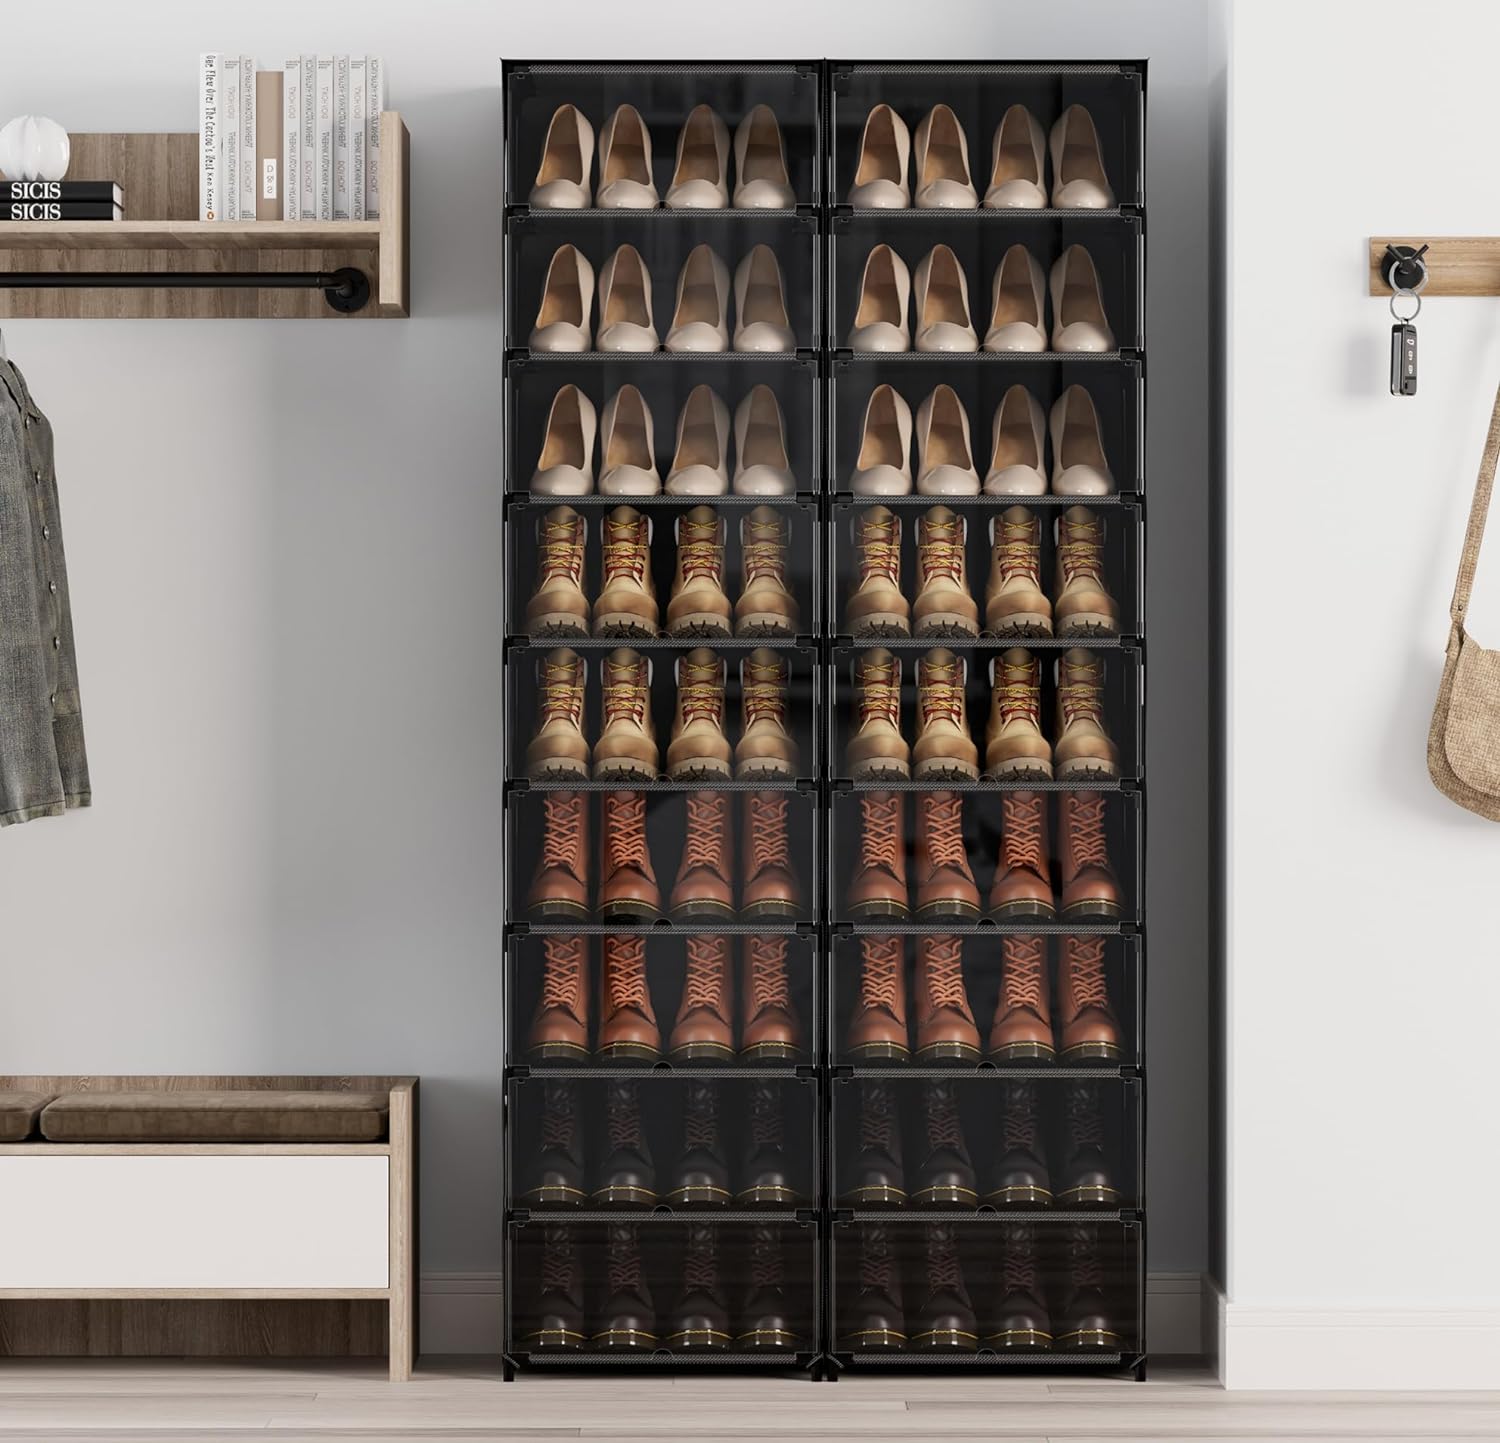 10 Tier Shoe Rack Large Organizer Storage Cabinet For 50 Pairs